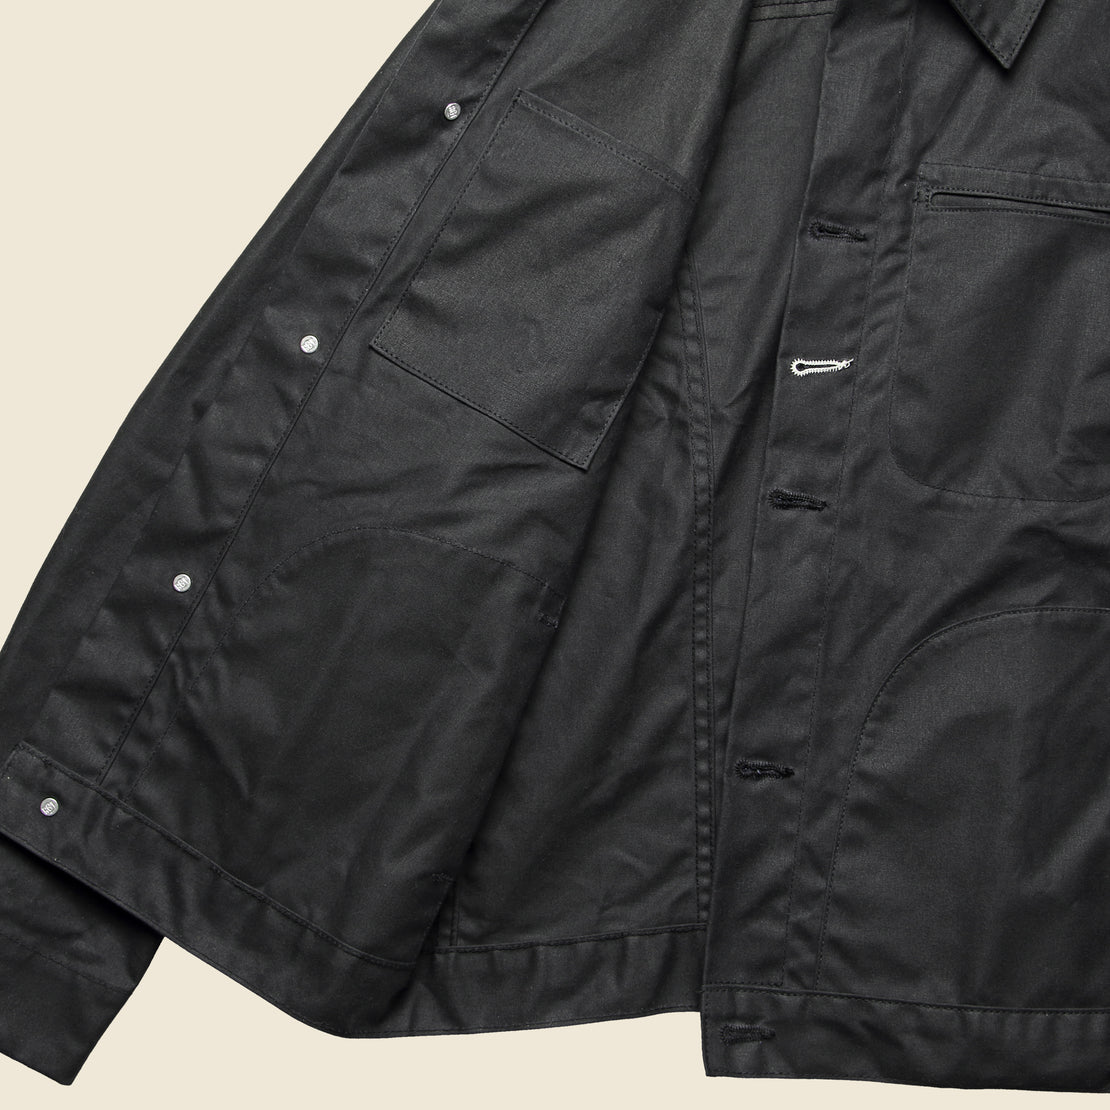 Supply Jacket - Waxed Black Ridgeline - Rogue Territory - STAG Provisions - Outerwear - Coat / Jacket